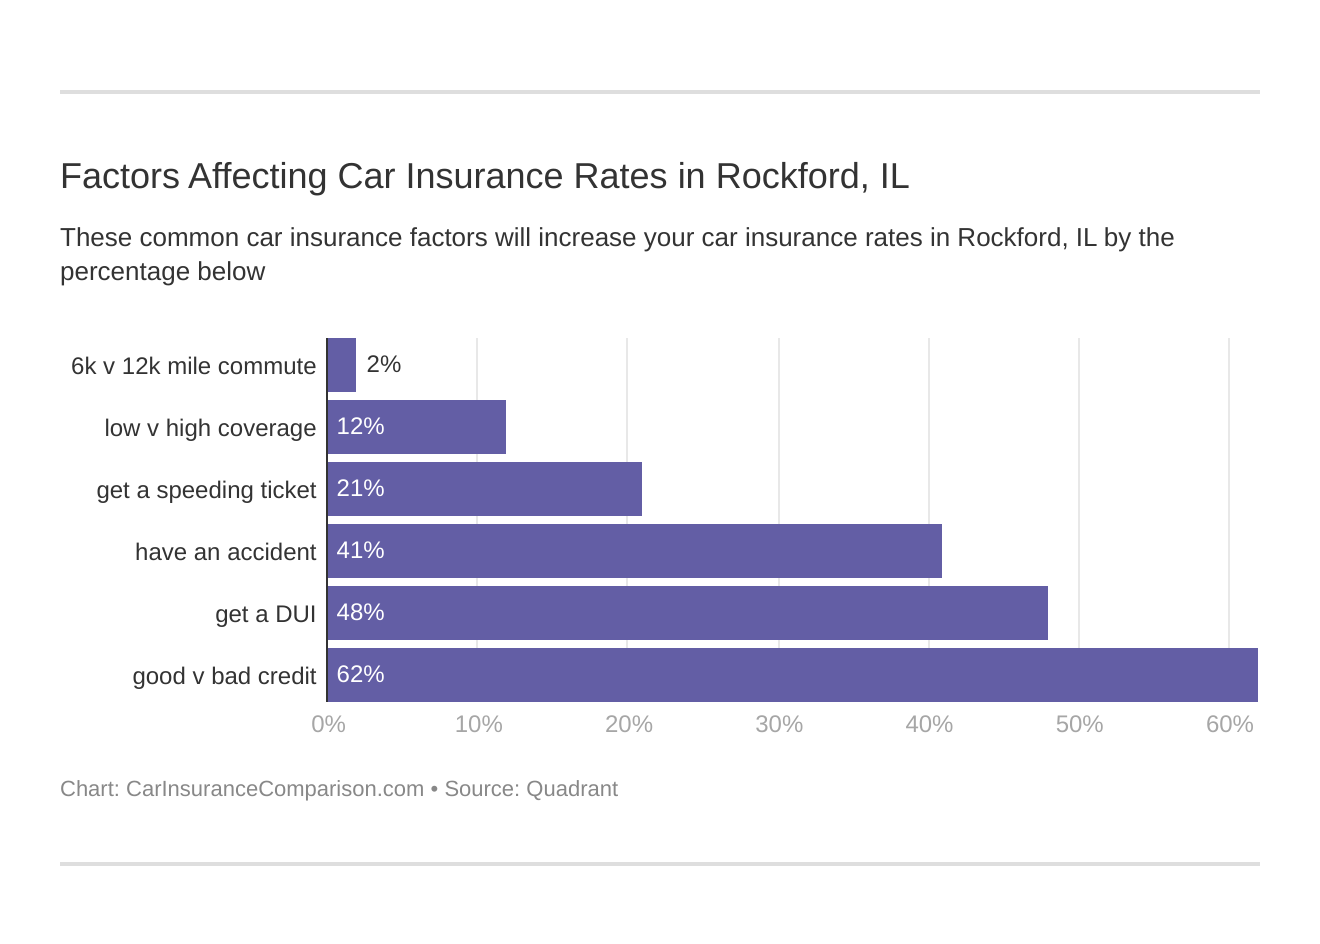 Factors Affecting Car Insurance Rates in Rockford, IL